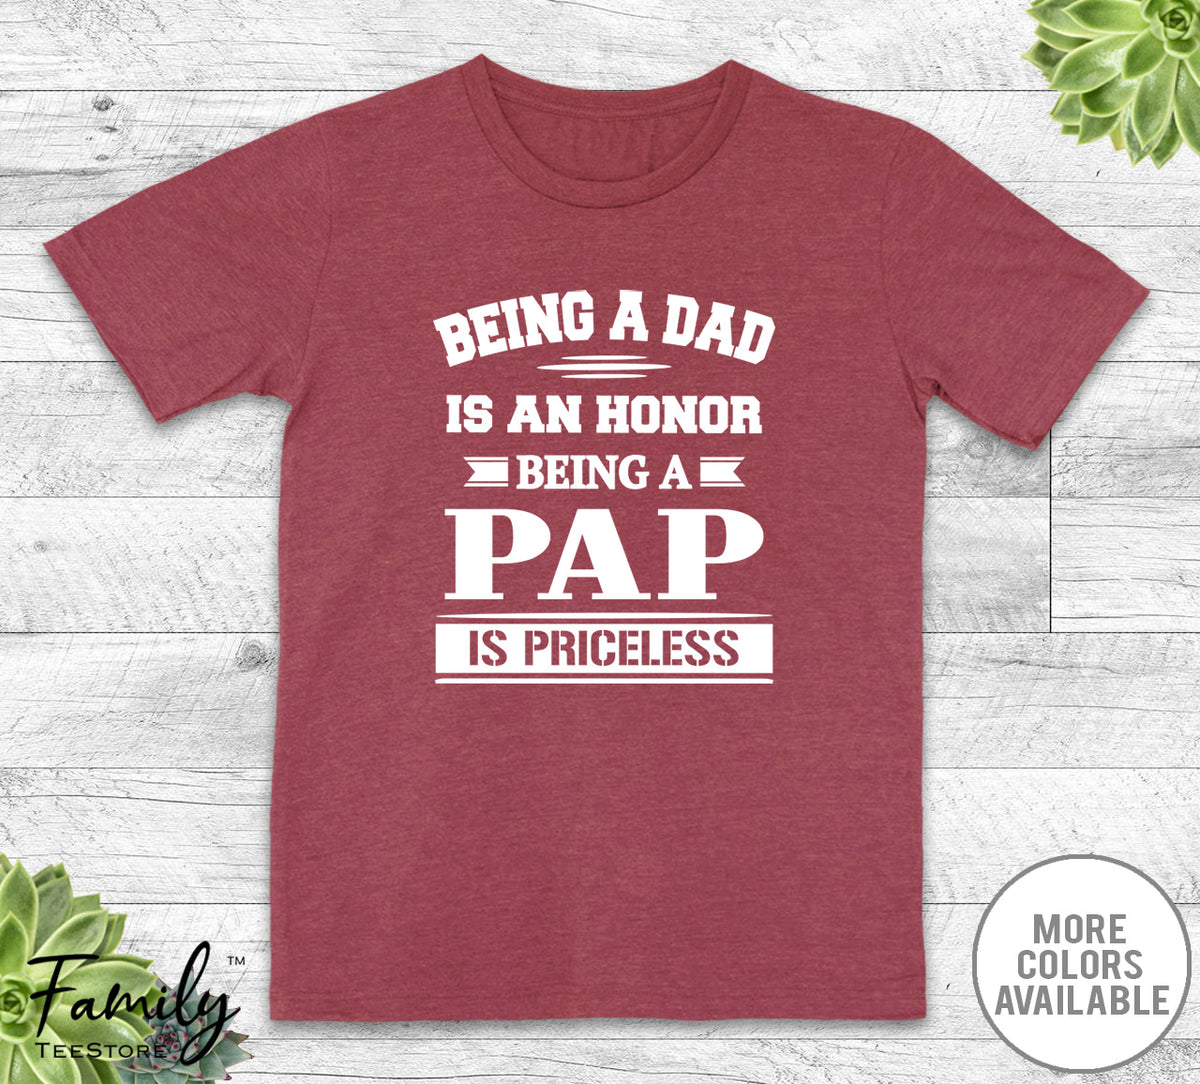 Being A Dad Is An Honor Being A Pap Is Priceless - Unisex T-shirt - Pap Shirt - Pap Gift